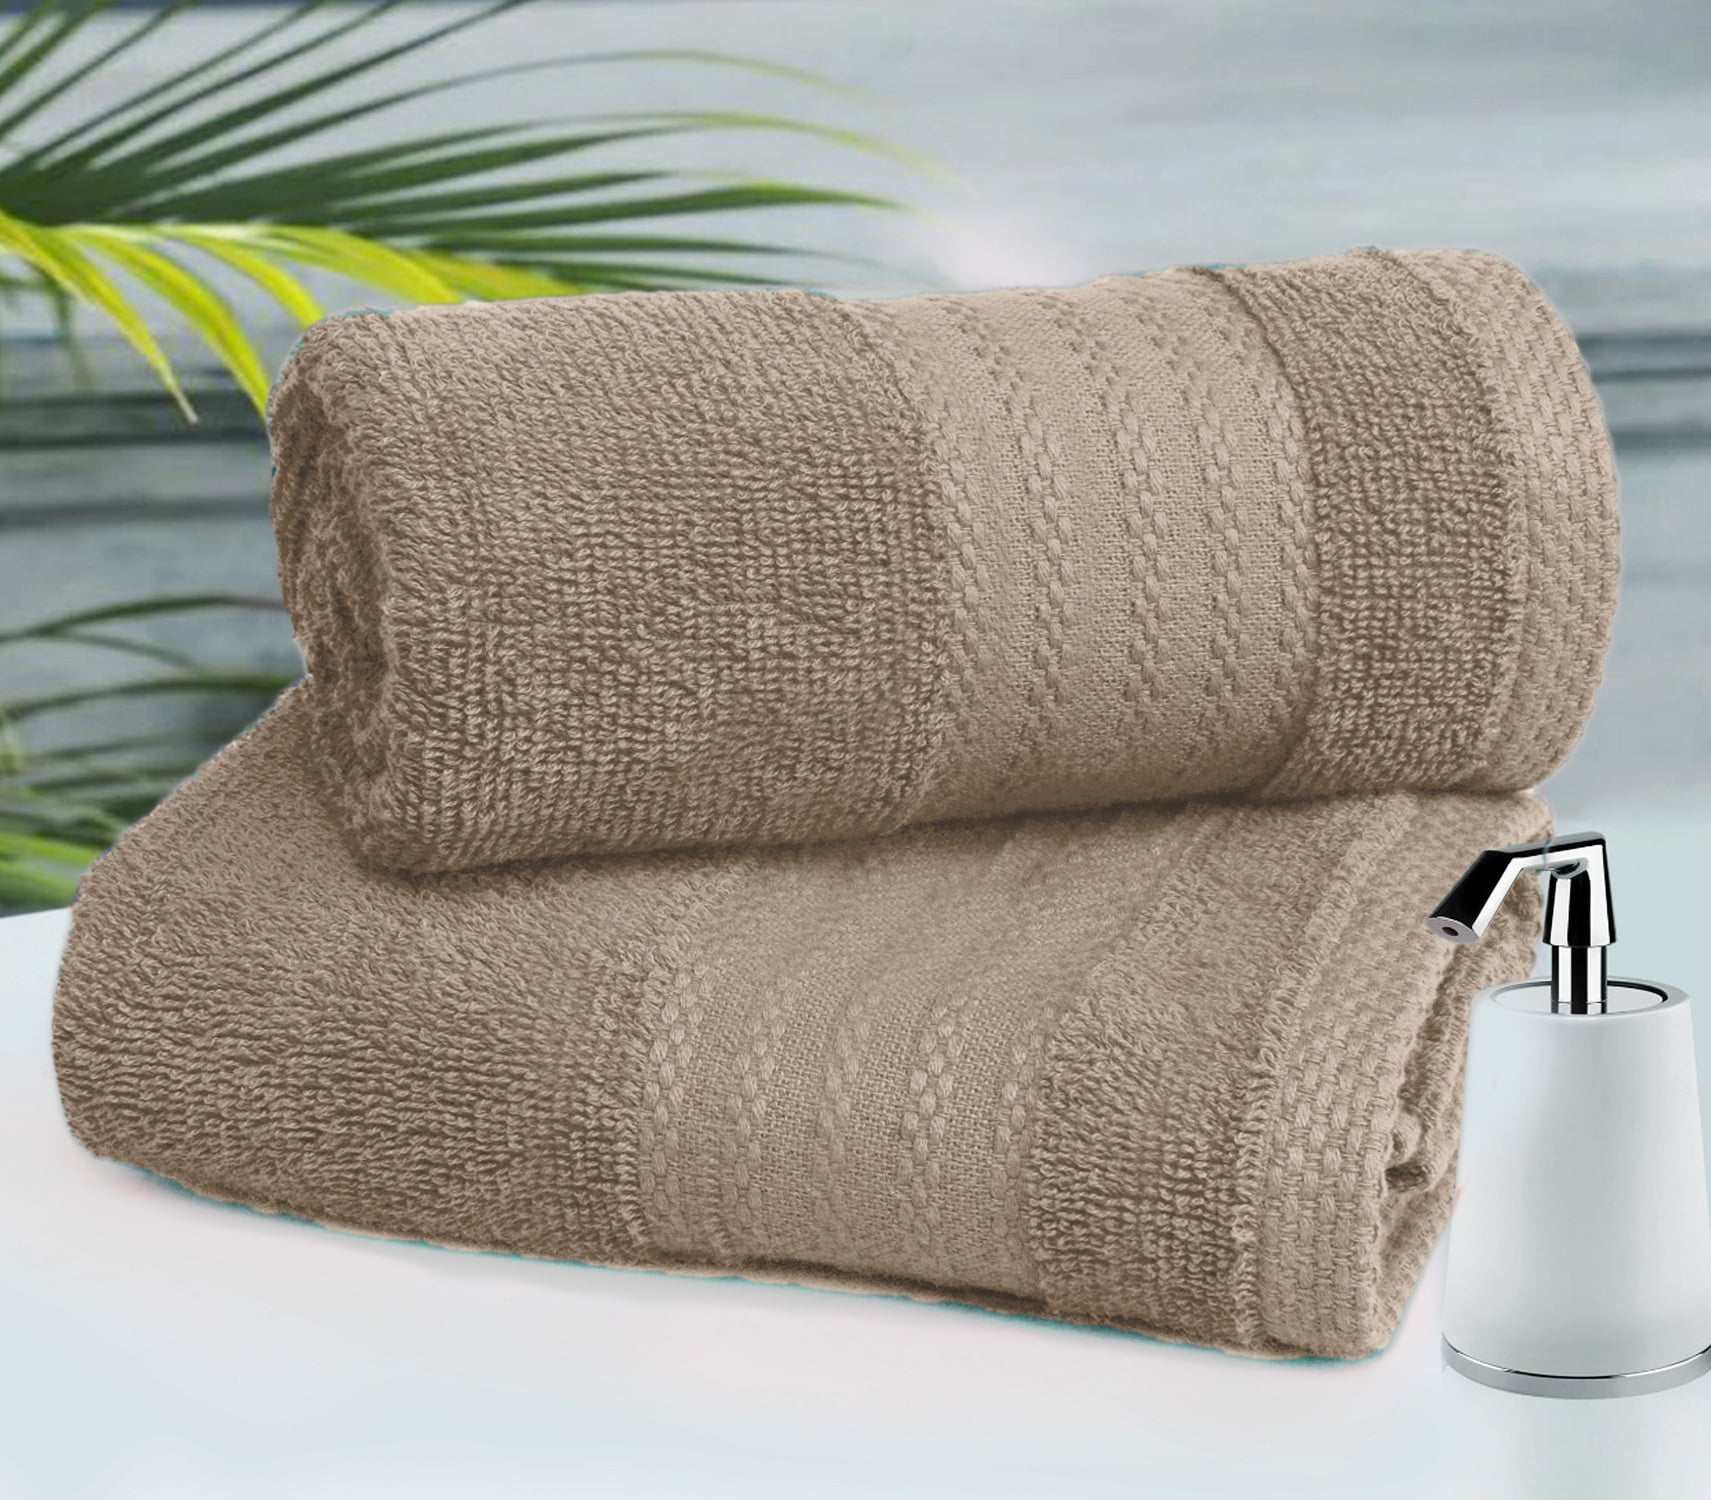 CHATEAU HOME COLLECTION Set of 4 Granite Grey, 100% Combed Cotton Bath  Towel Sets, Highly Absorbent Towels for Bathroom, Extra Large 54 x 28,  Extra